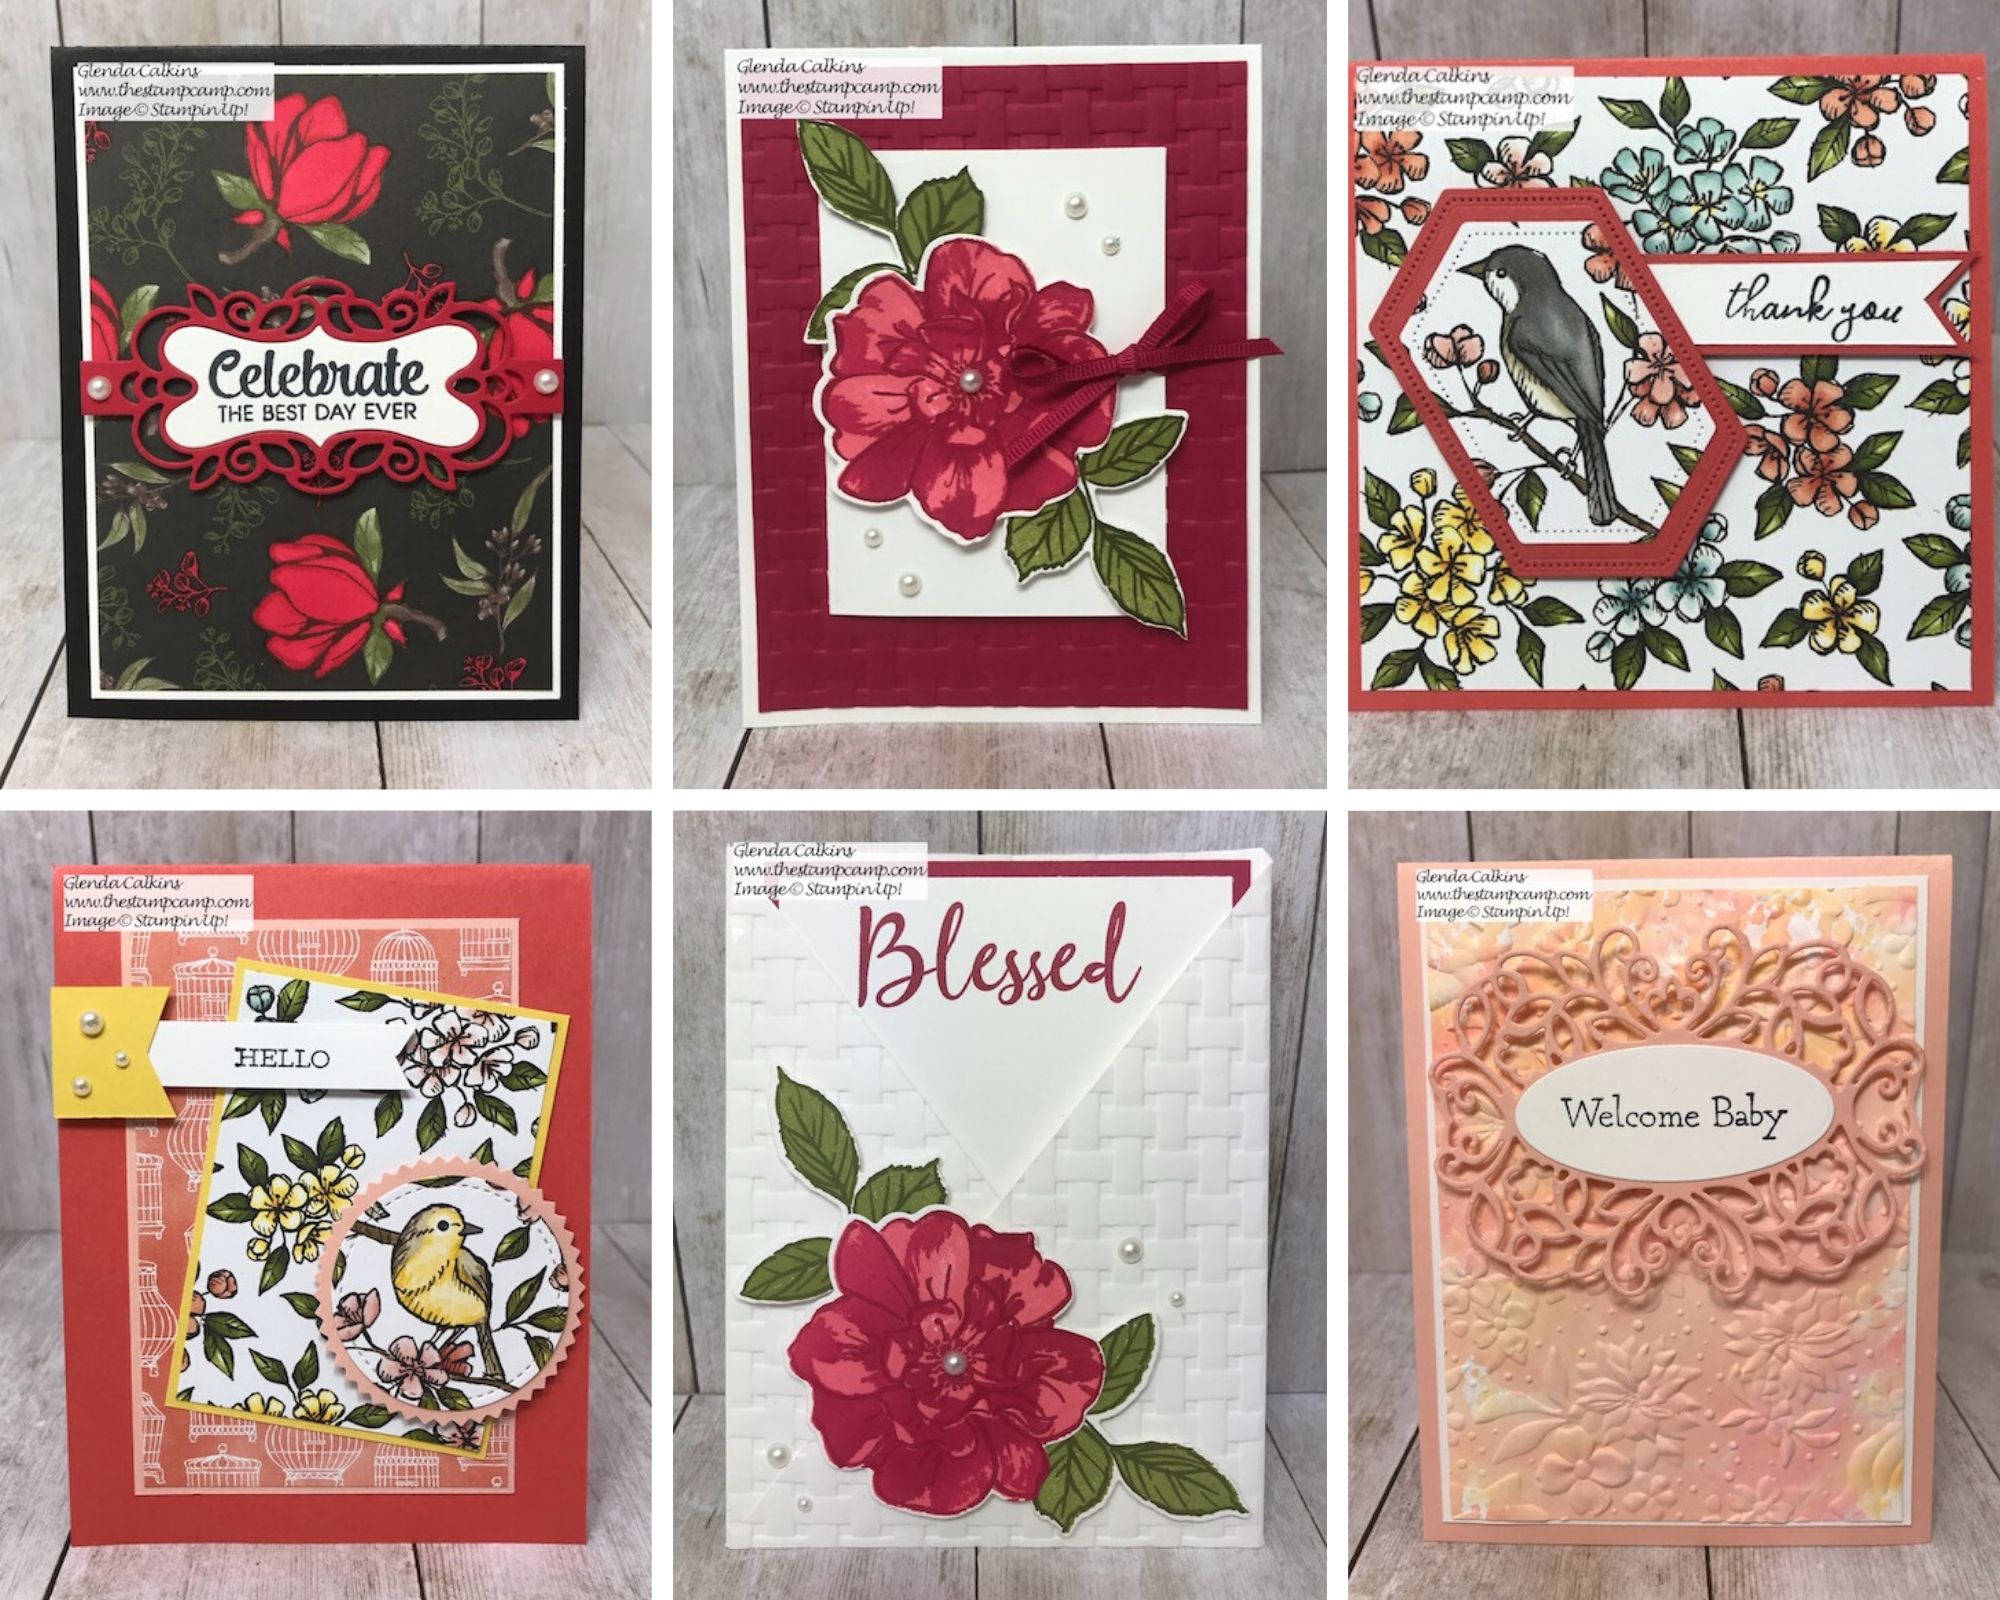 Stamp Sets from the Extravaganza Online Special. Just a few I have done using the special priced sets. Details on my blog here: https://wp.me/p59VWq-ayR #stampinup #thestampcamp #extravaganza